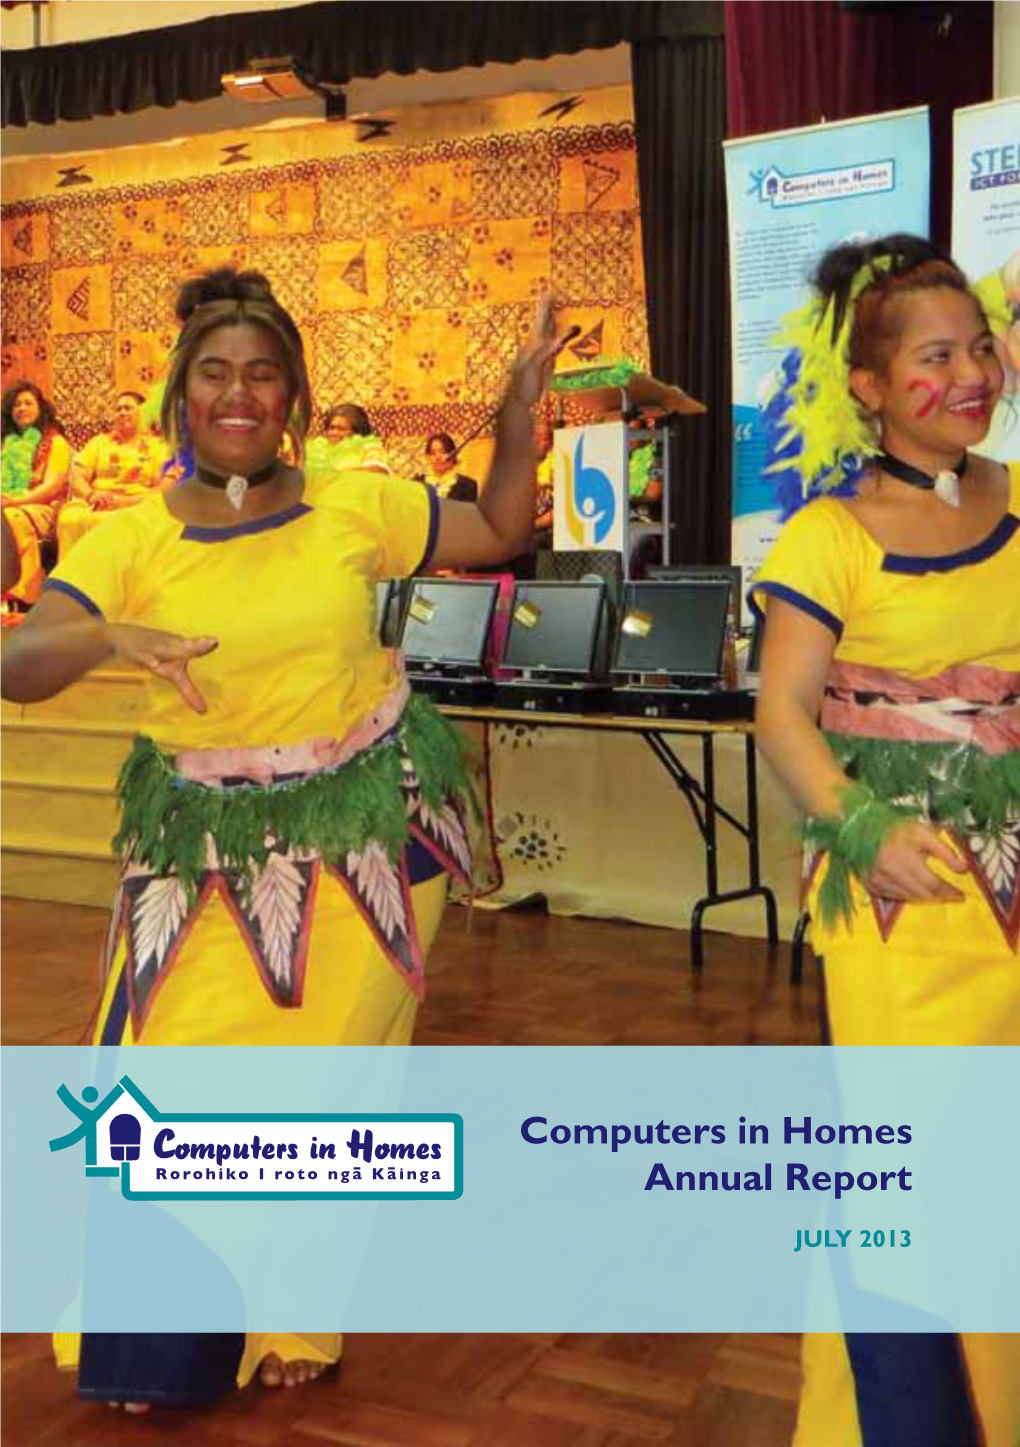 Computers in Homes Annual Report 2013